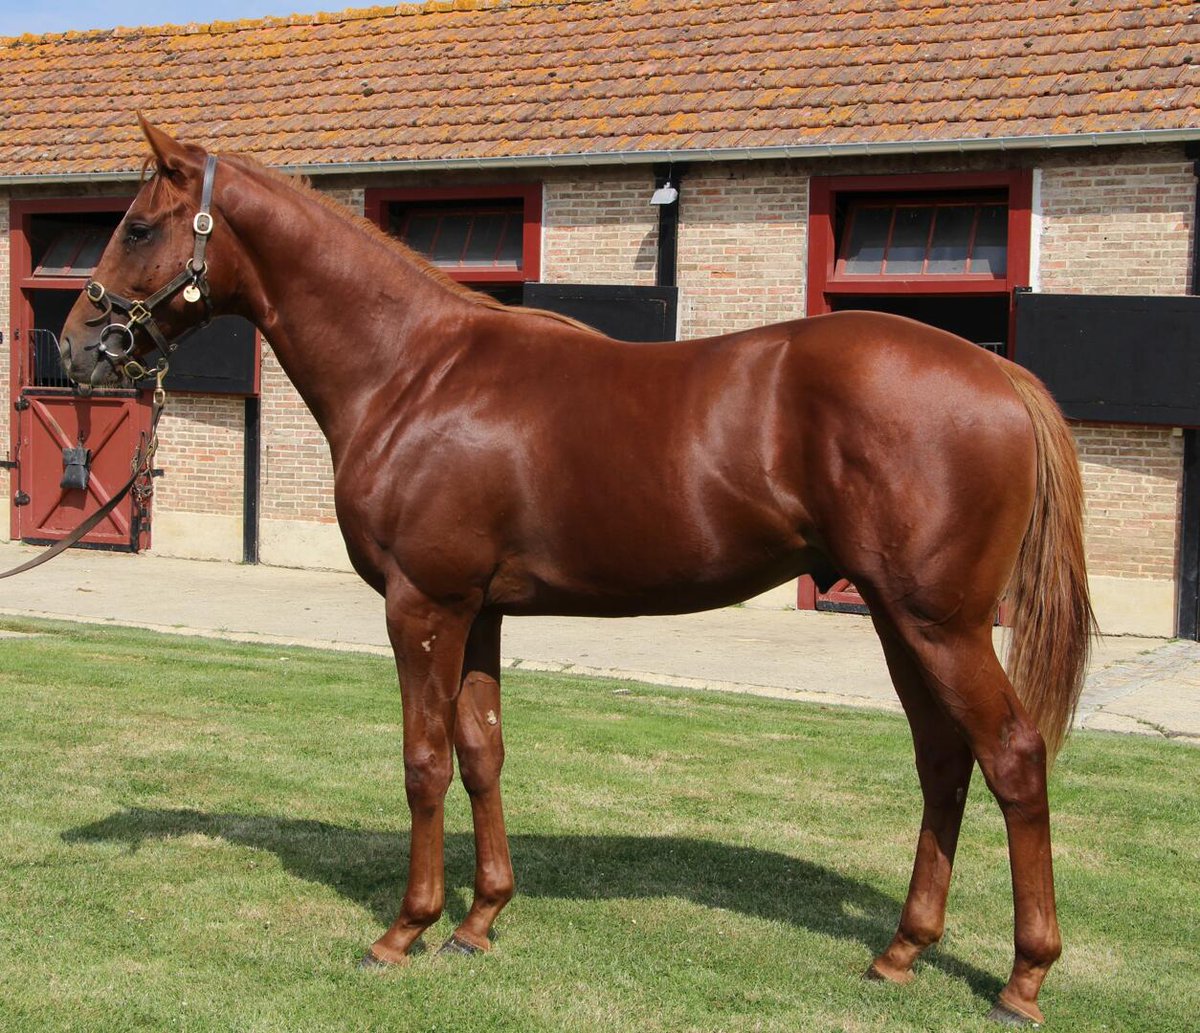 🥇 𝐊𝐎𝐕𝐑𝐎𝐕 Purchased at the #osarus La Teste September Yearling sale by @MandoreAgency from @harasdubuff, KOVROV #Toronado wins the Prix Hippocampus-2eme étape du Défi du Galop (class 1) at La Teste for JC.Rouget, JB.Eyquem and Alain Jathiere. Congrats to all involved! 👏